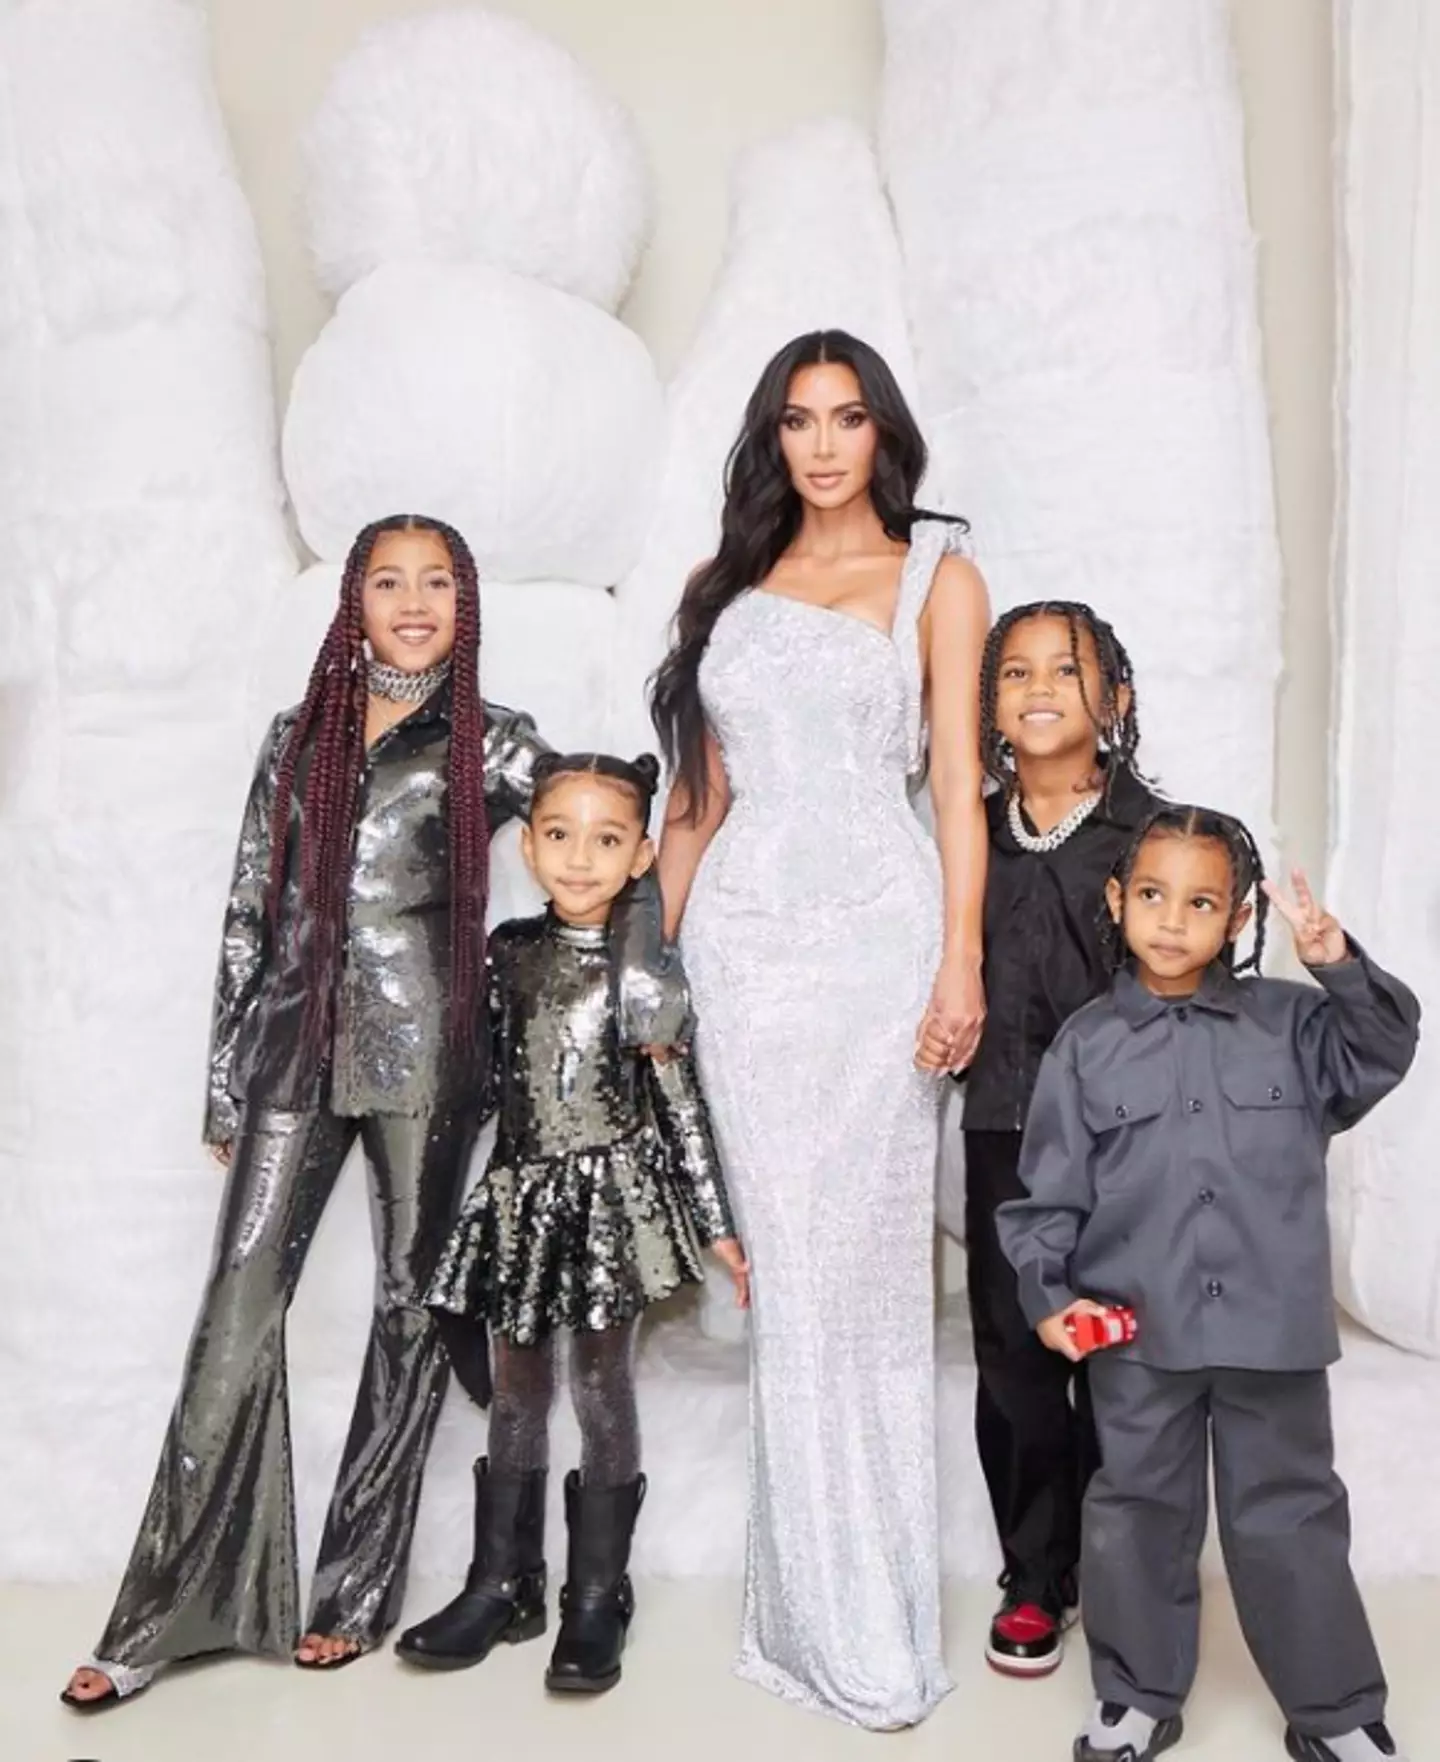 Kim shares kids North, Saint, Chicago, and Psalm with ex Kanye West.